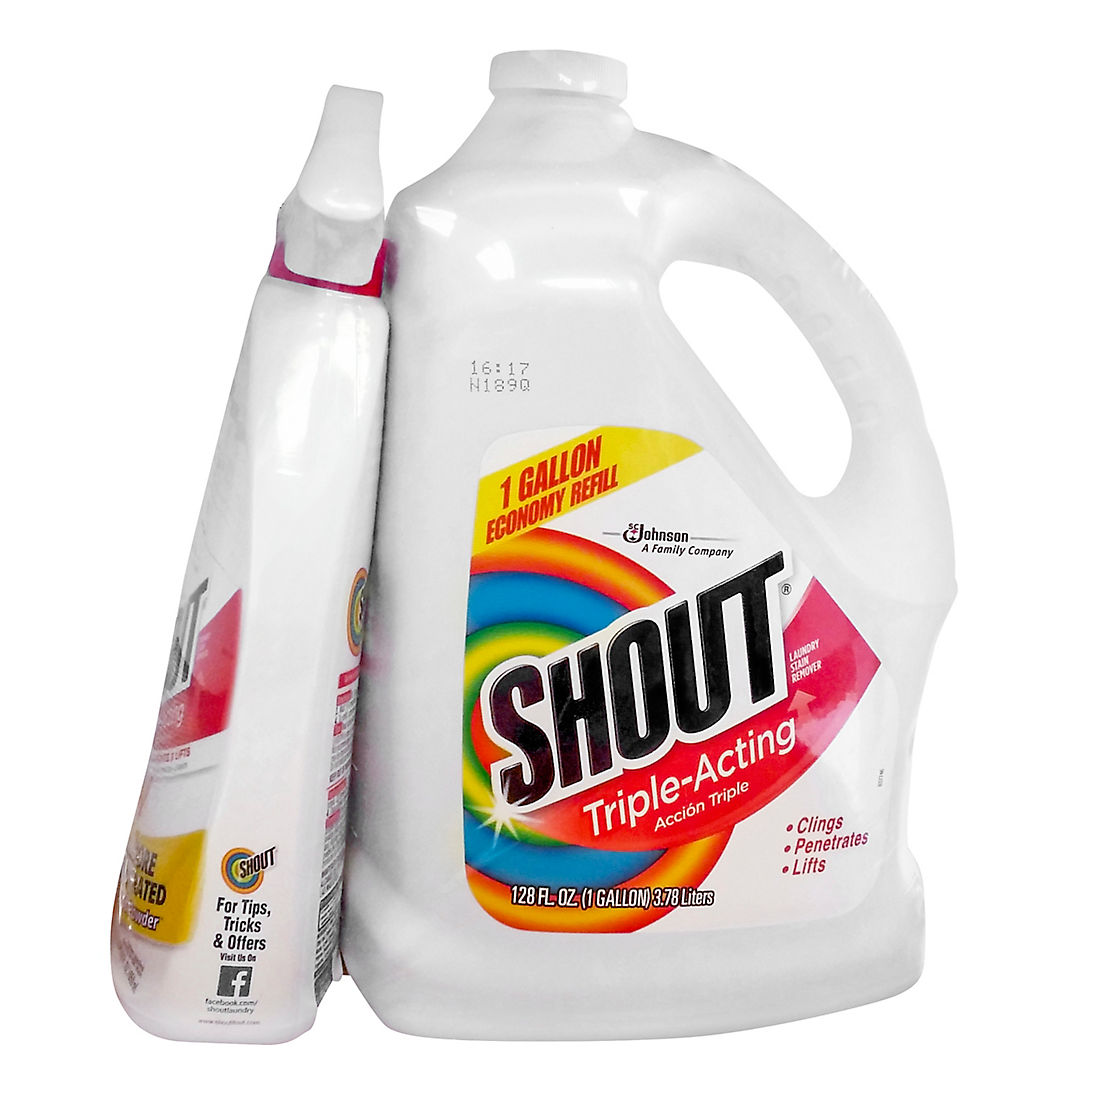 Shout Laundry Stain Remover Trigger Spray, 22 fl oz, Pack of 2